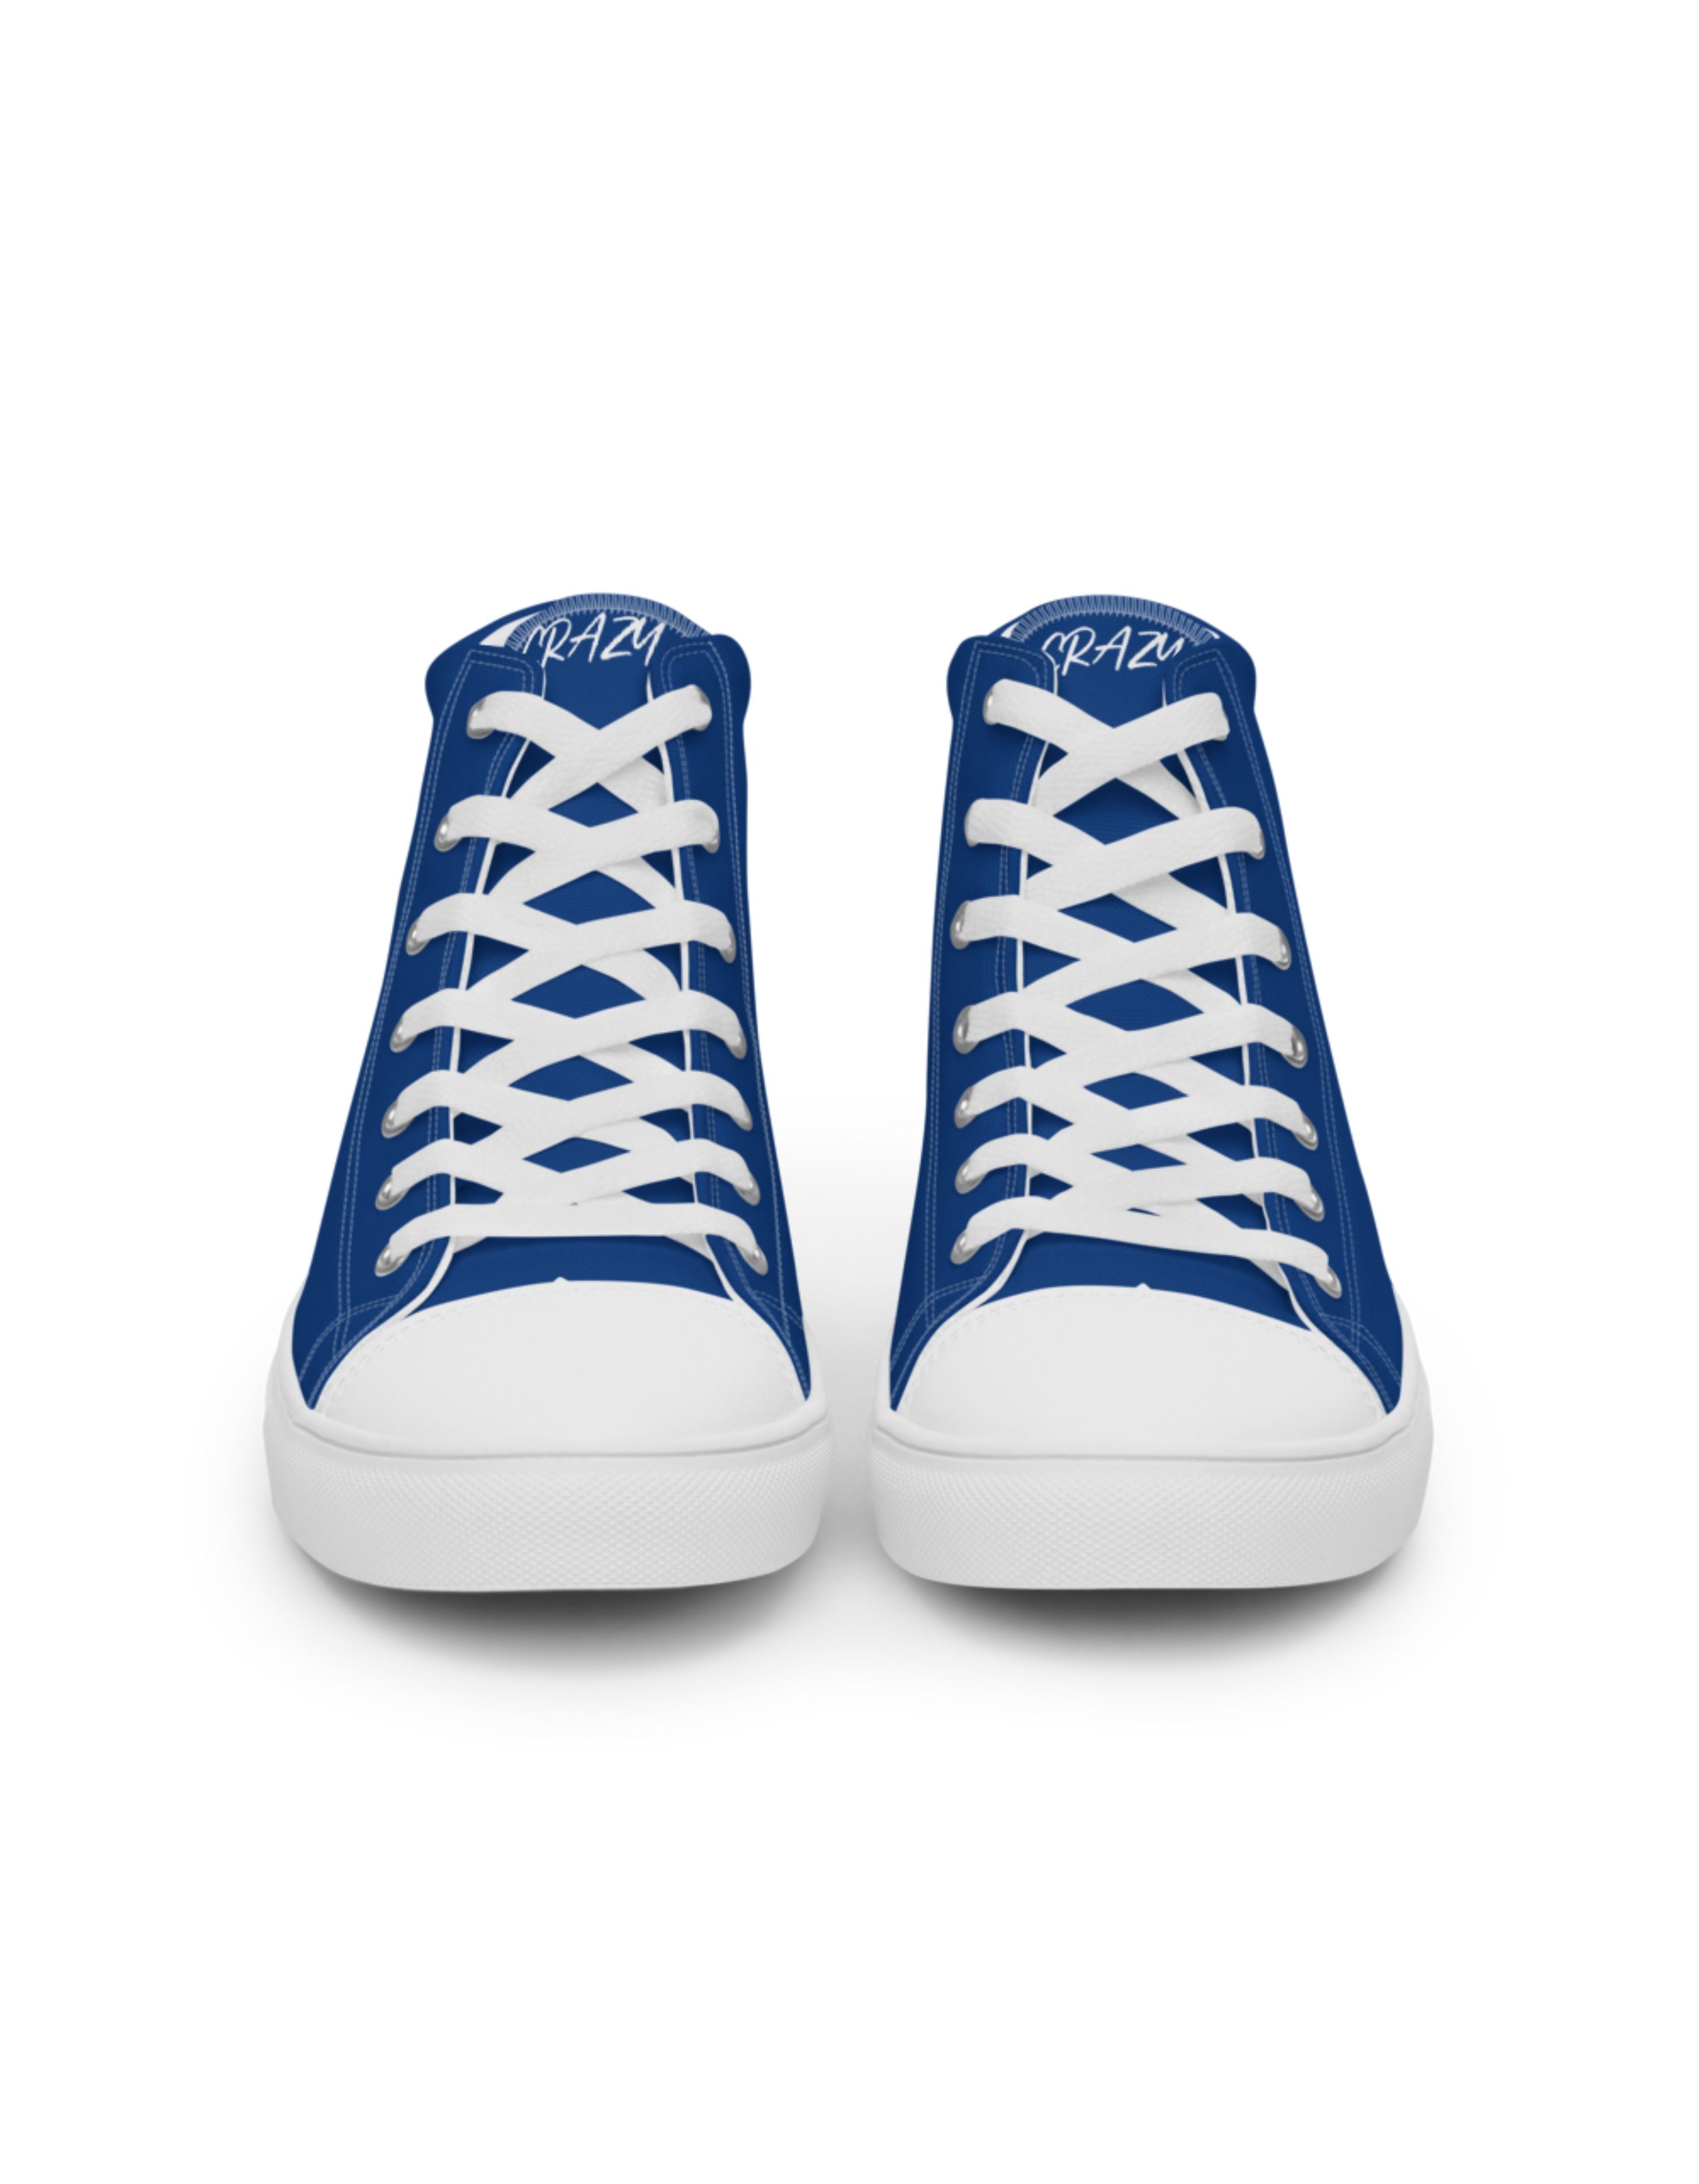 "SAY MY NAME" men's high blue canvas sneakers